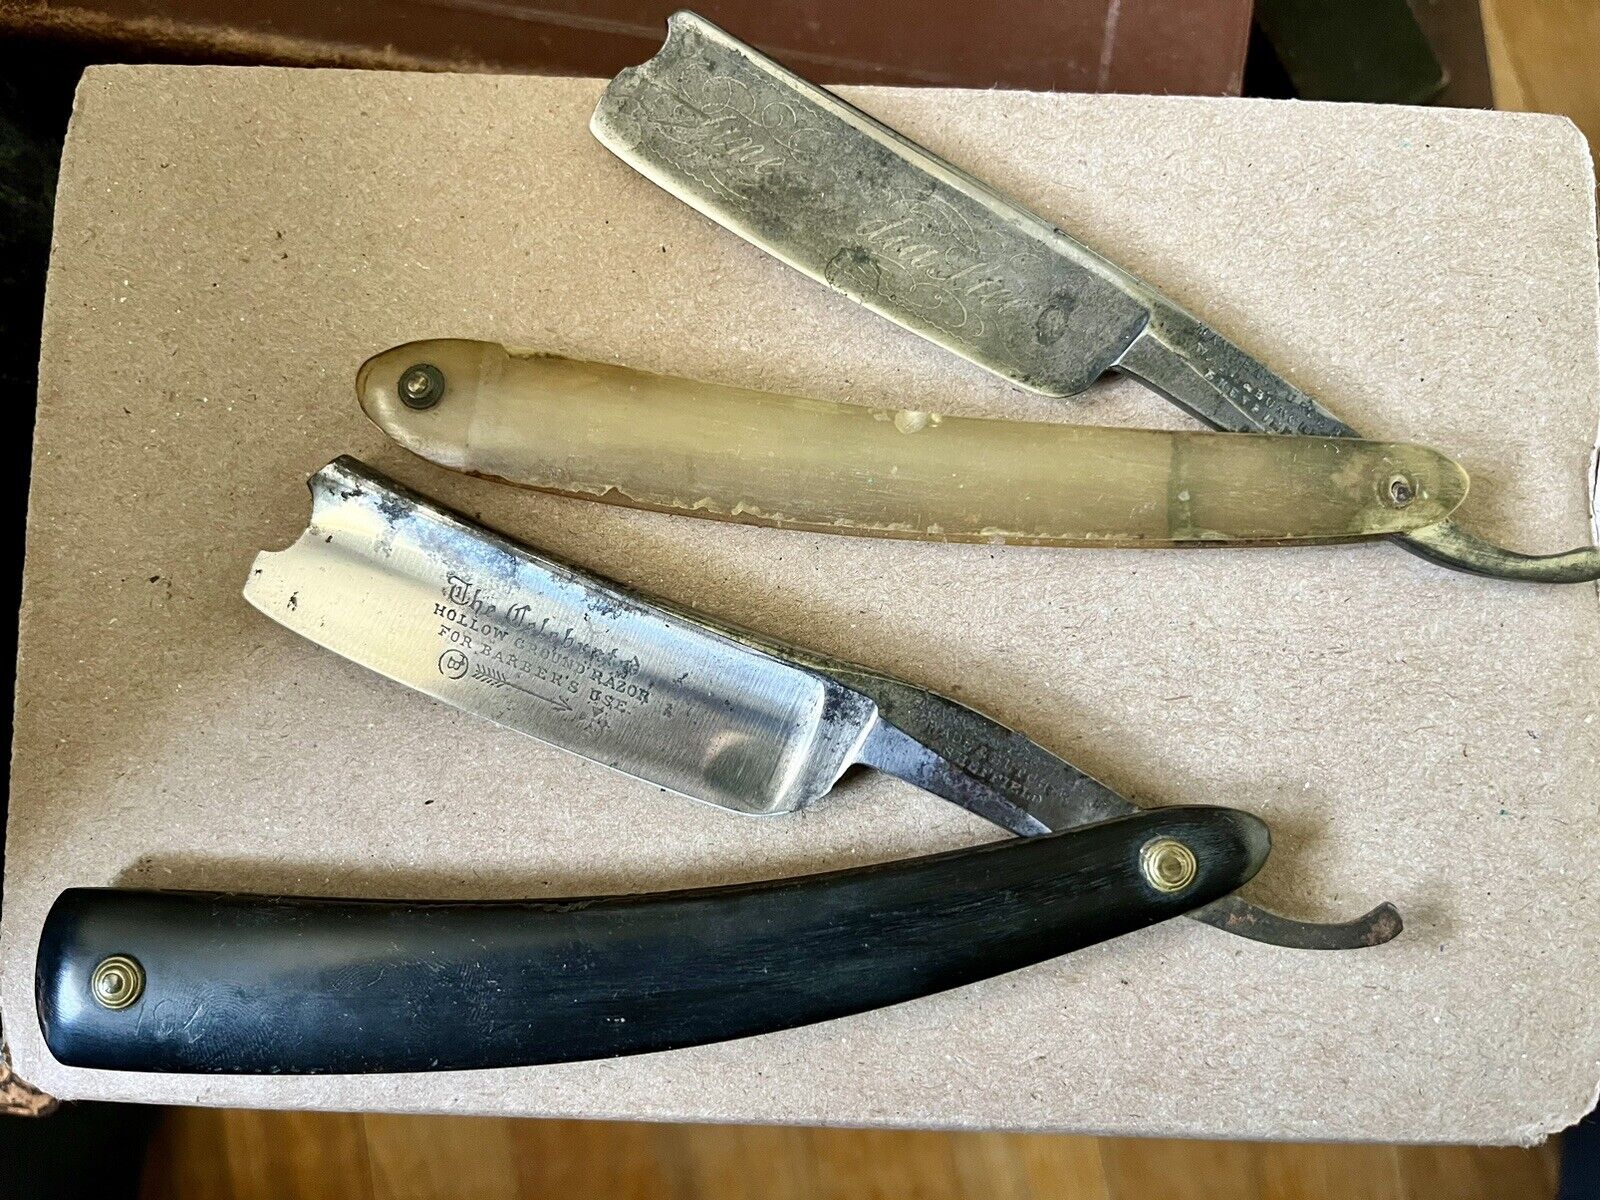 WADE & BUTCHER FOR BARBER'S USE & FINE INDIA STEEL STRAIGHT RAZORS